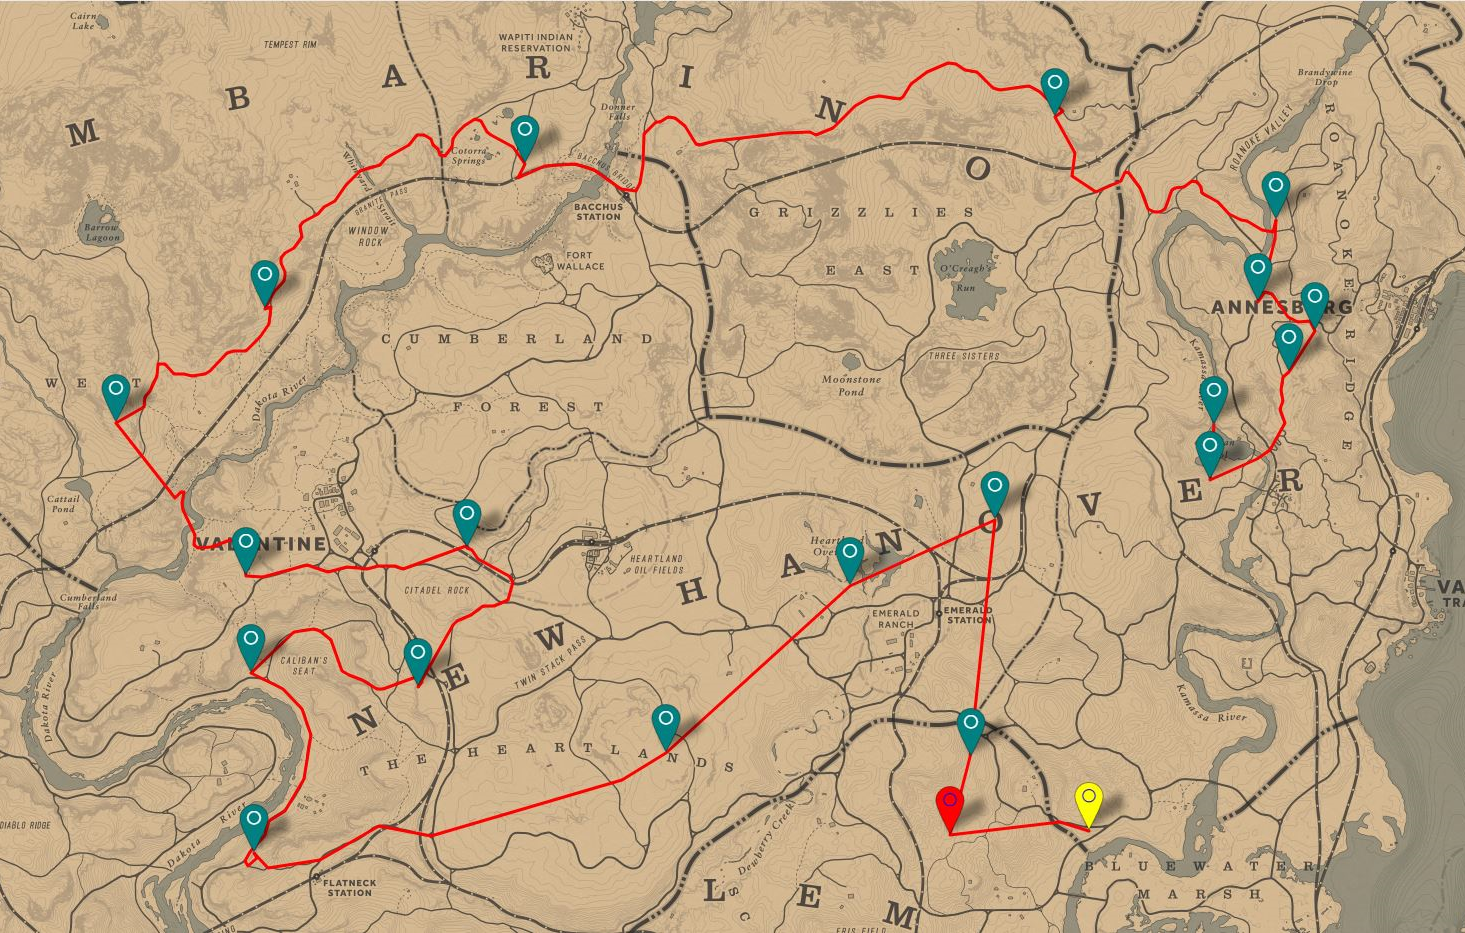 red dead redemption 2 interactive map herb